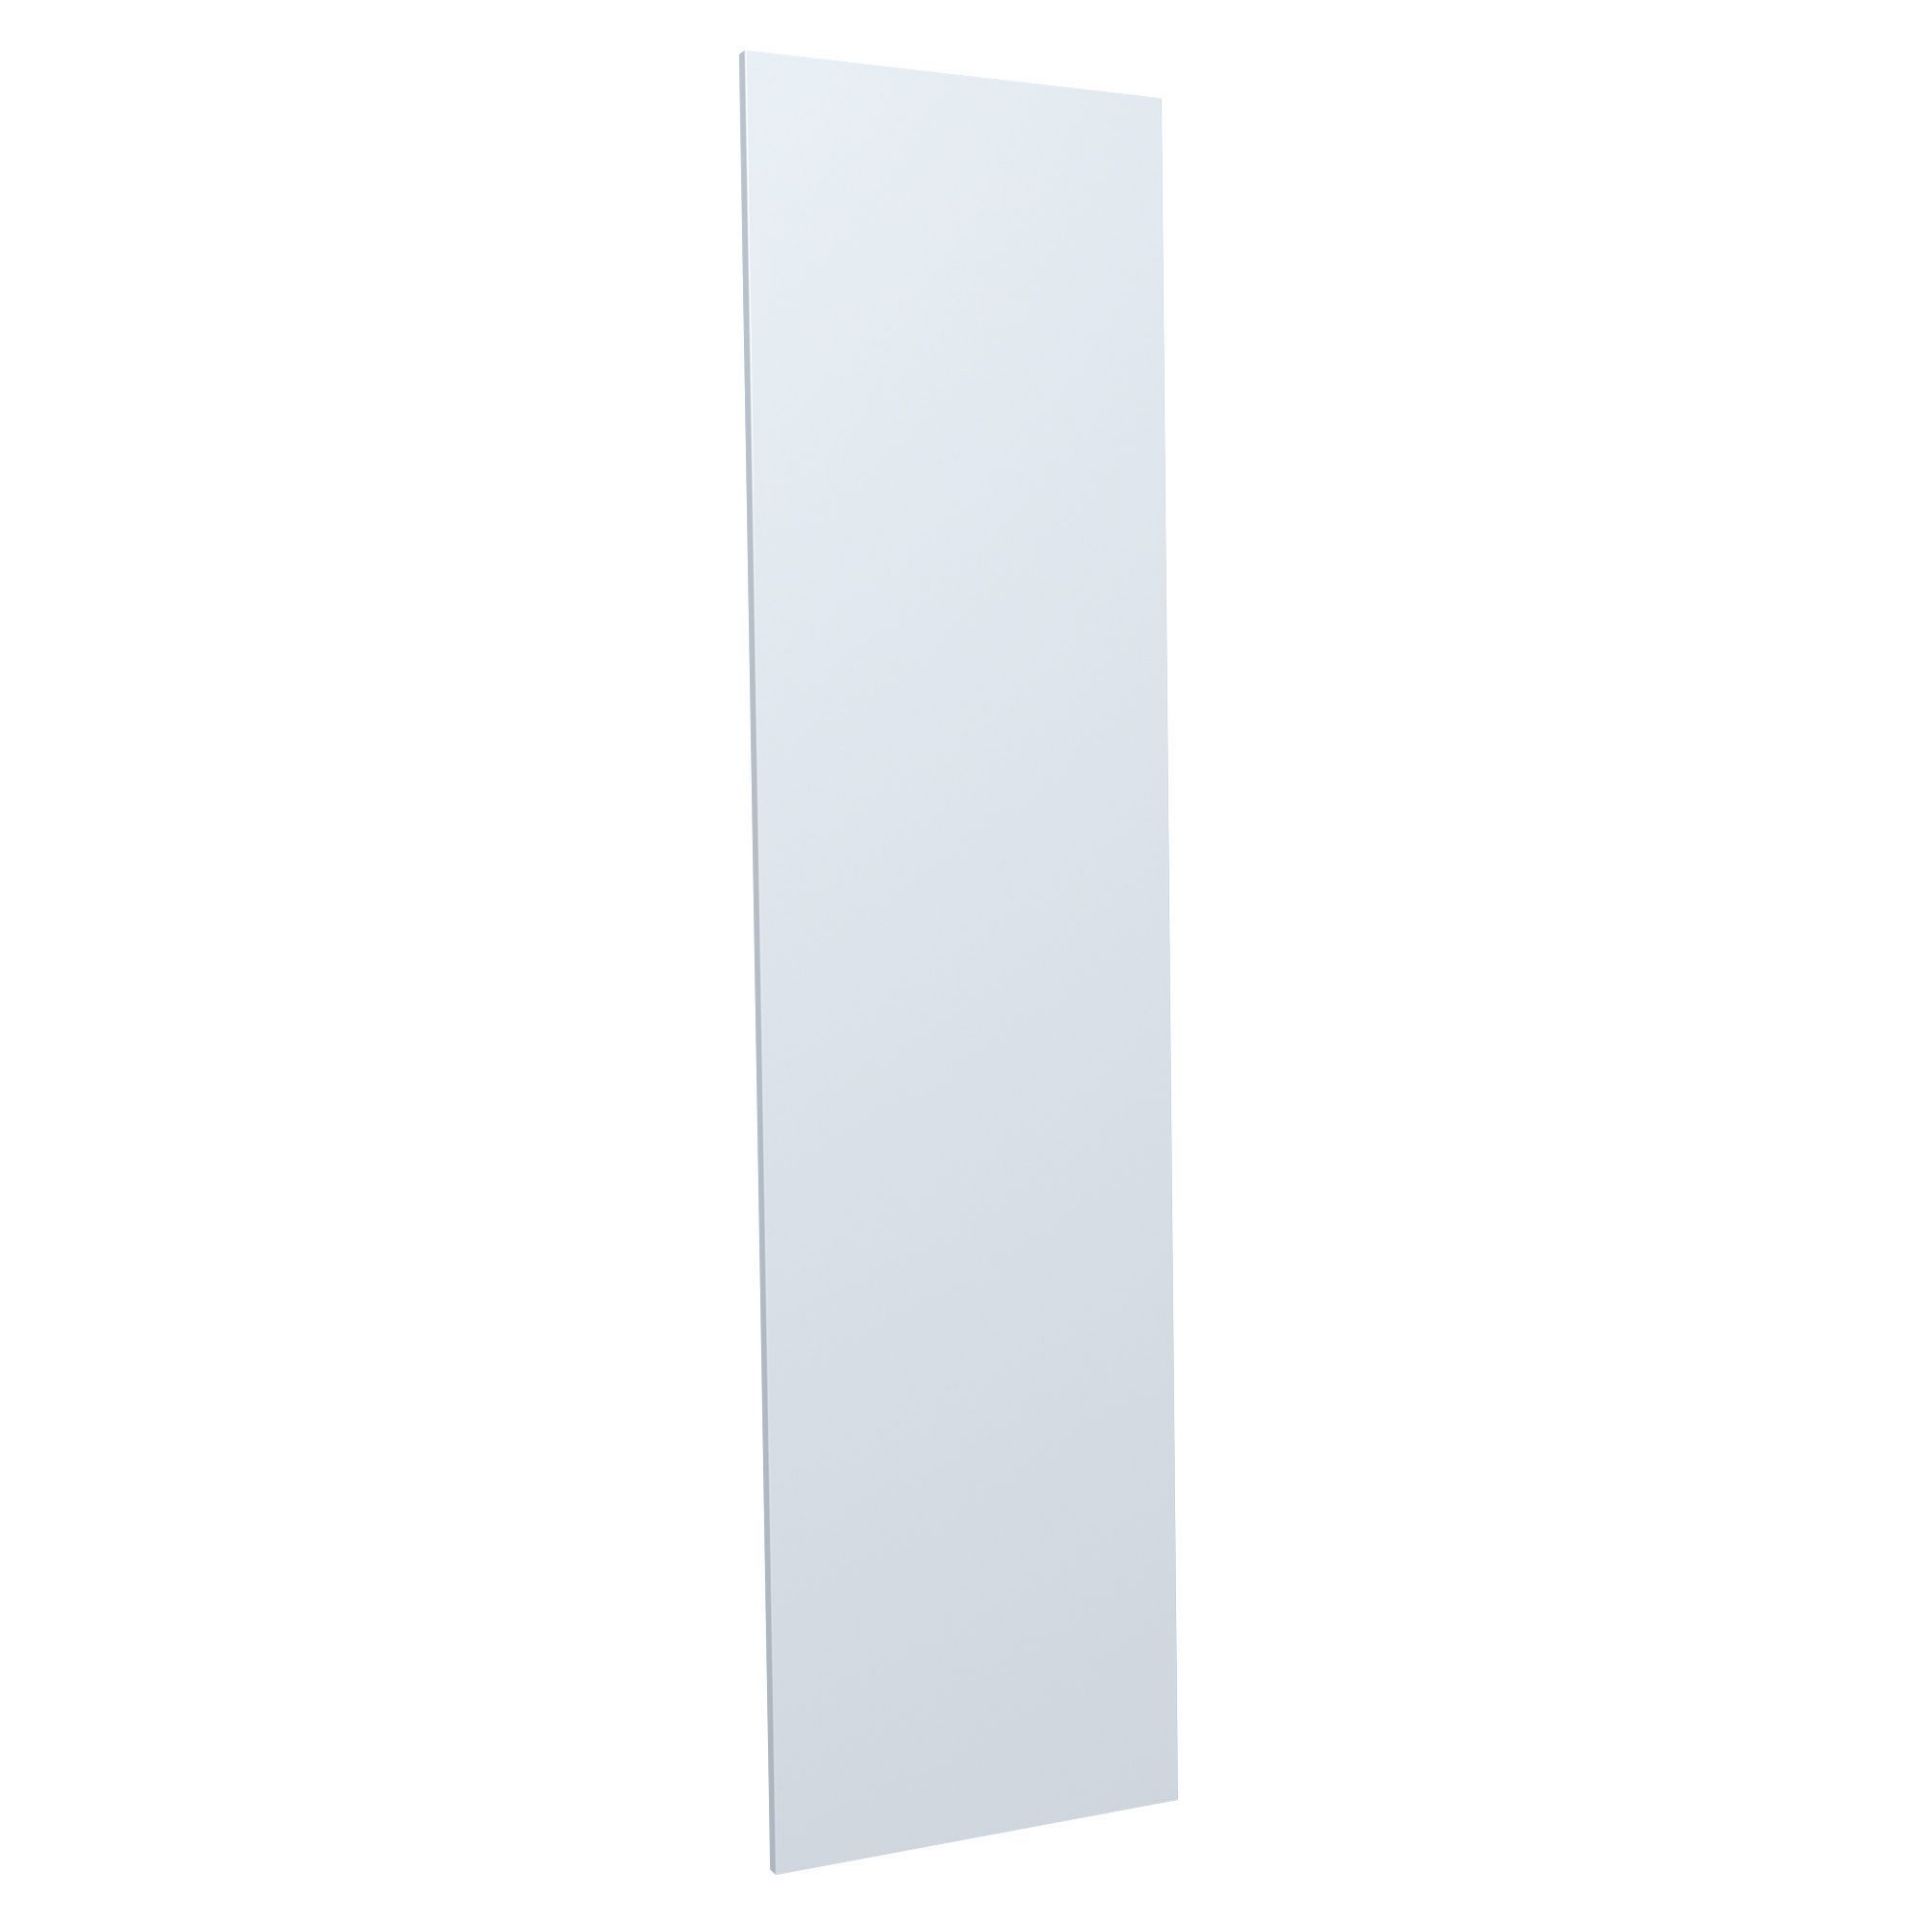 (RR105) Darwin White Wardrobe door 1936x497mm . The exciting thing about our Darwin range is t...((